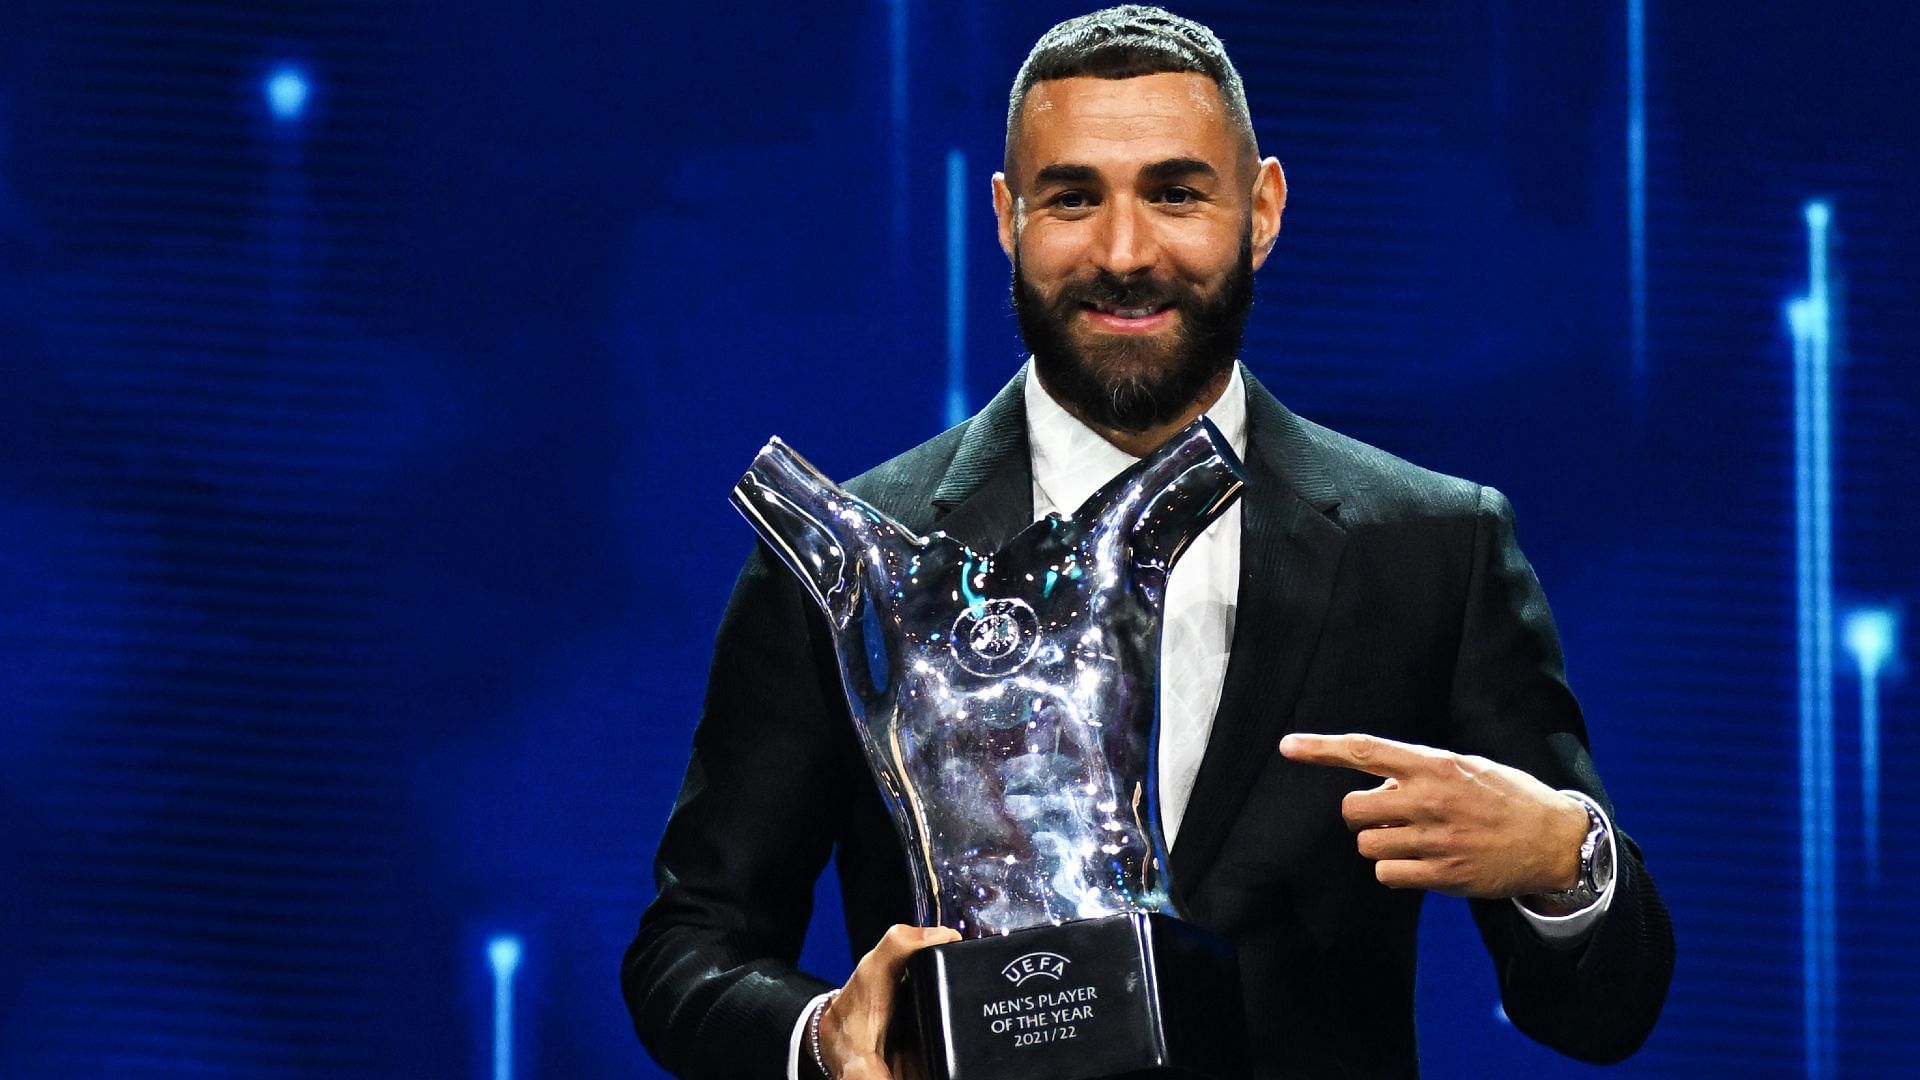 Karim Benzema has solidified his spot as one of the best players in the world (Image via AFP)